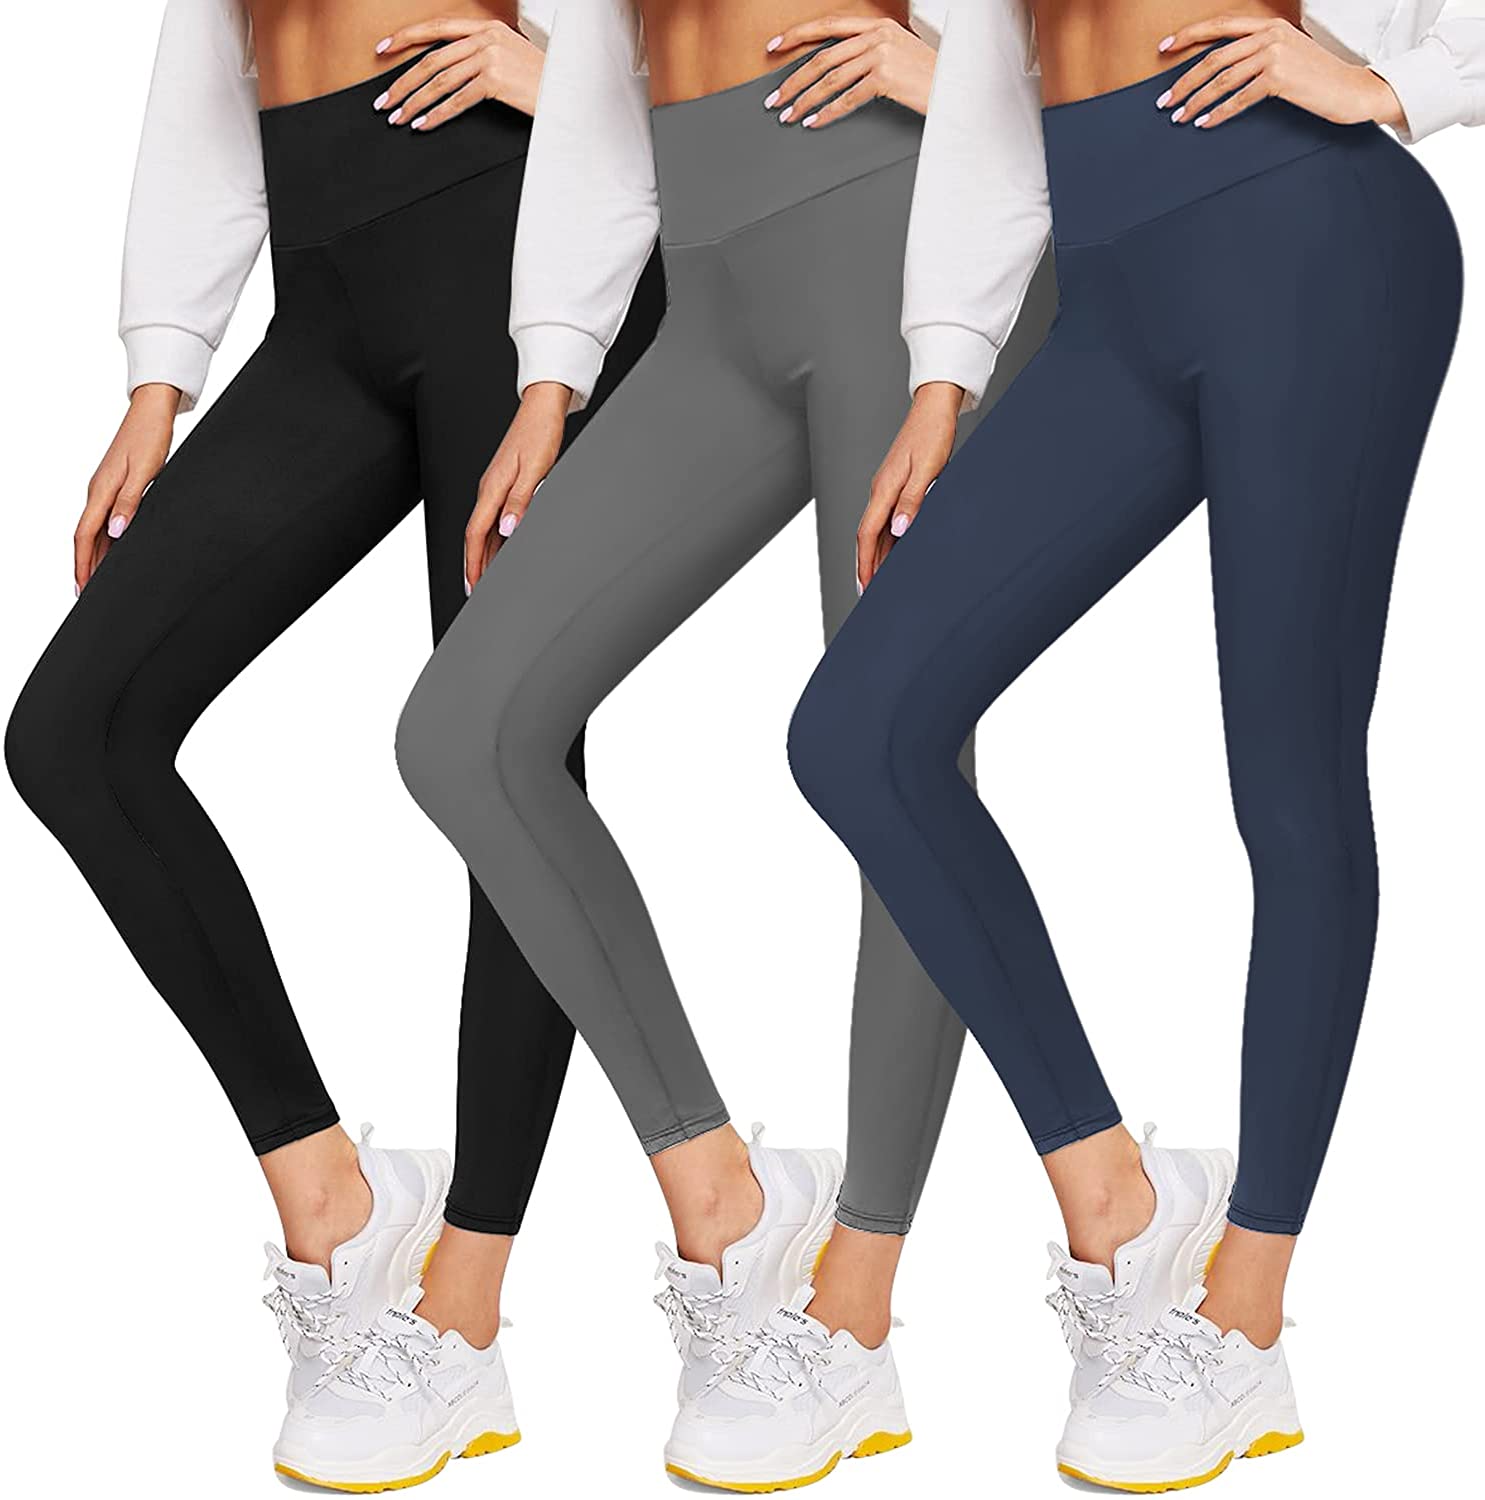  GROTEEN Ripped Leggings for Women Cutout Yoga Pants-High  Waisted Tummy Control Workout Running Skinny Leggings Black : Clothing,  Shoes & Jewelry